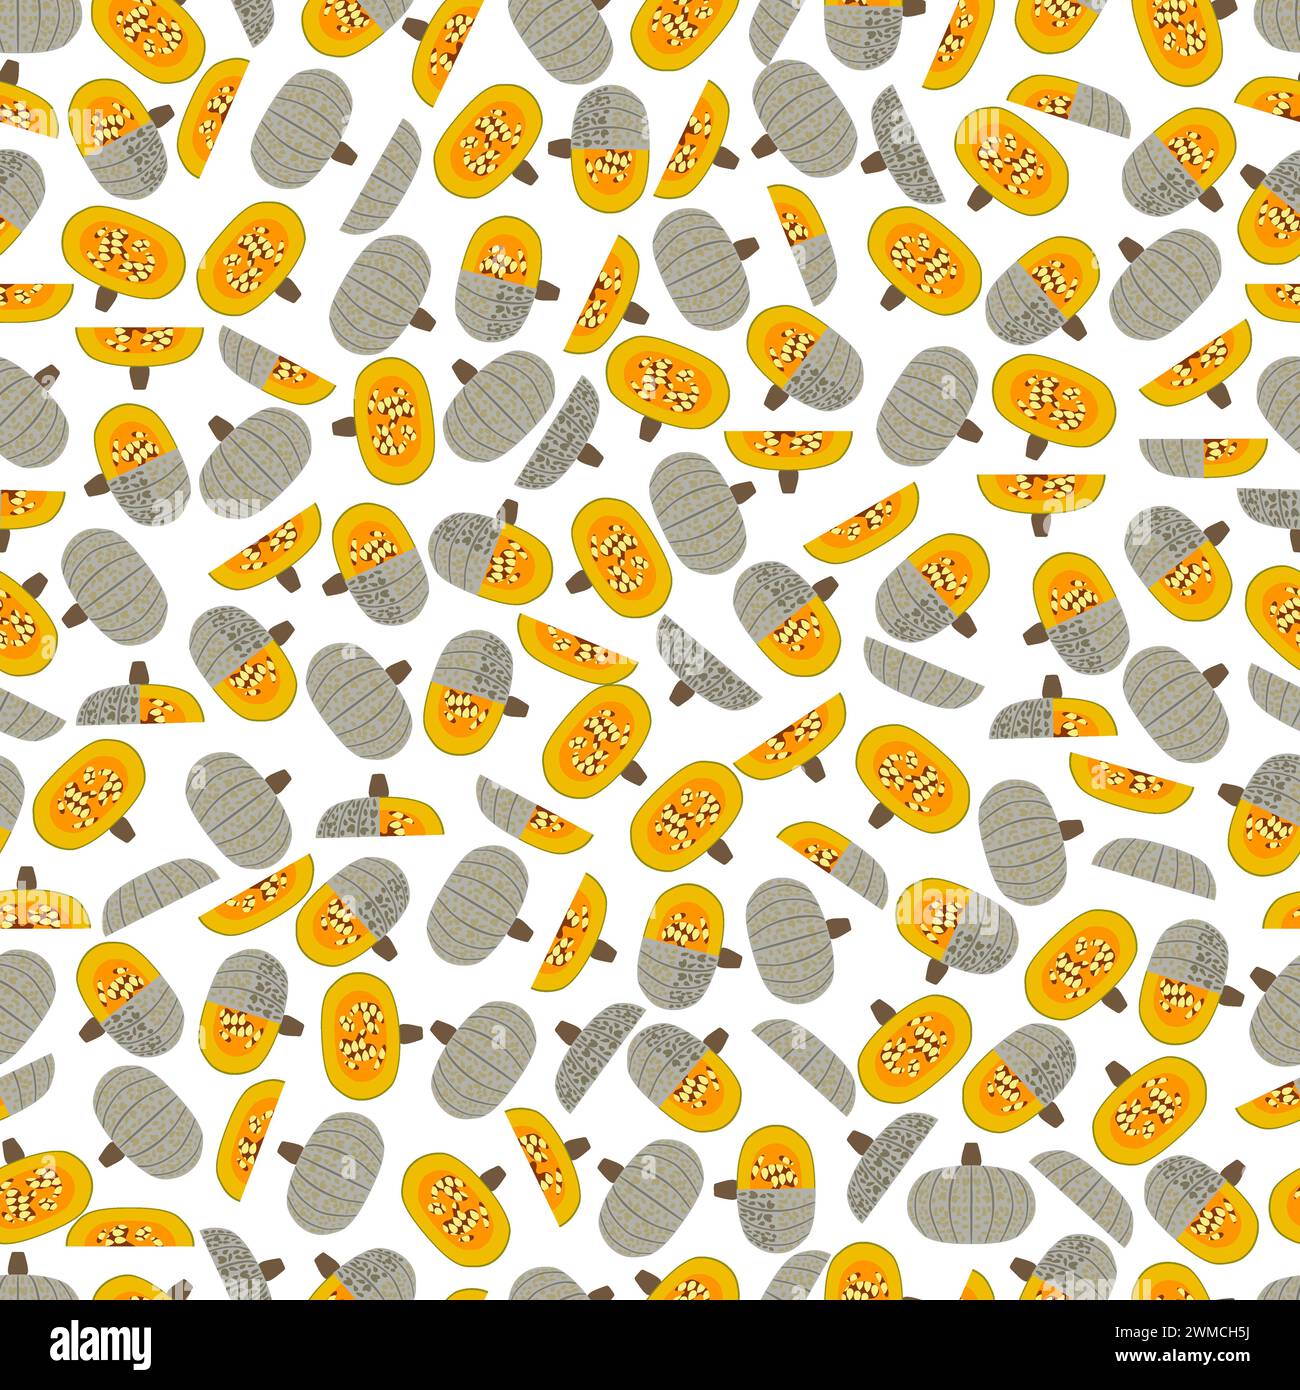 Seamless pattern with Confection squash. Winter squash. Cucurbita maxima. Fruit and vegetables. Flat style. Isolated vector illustration. Stock Vector